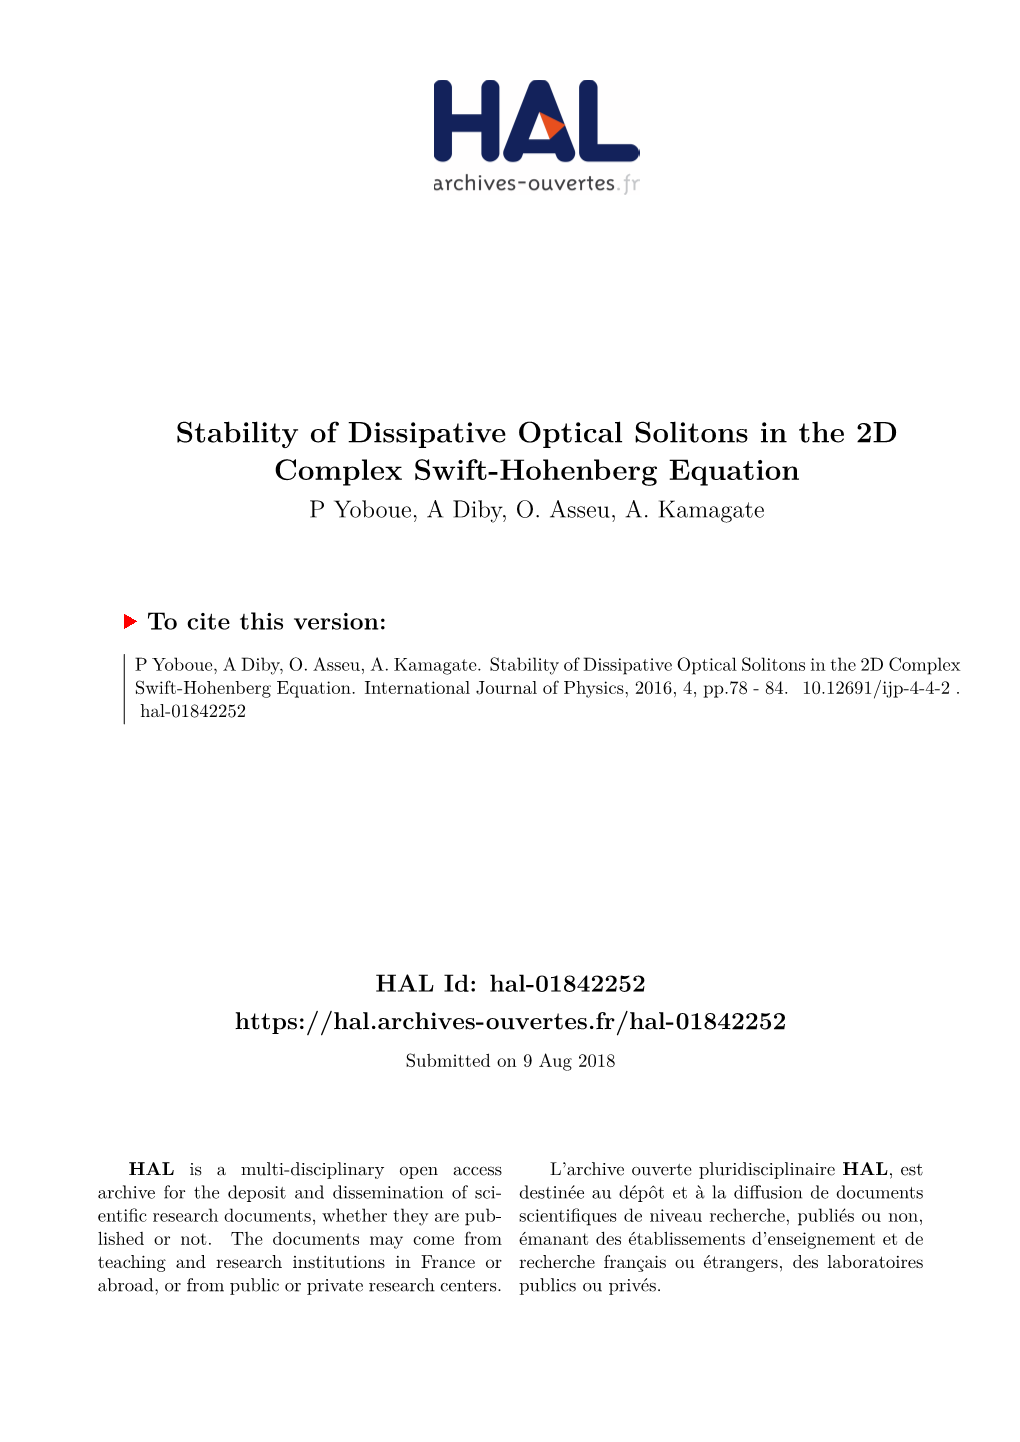 Stability of Dissipative Optical Solitons in the 2D Complex Swift-Hohenberg Equation P Yoboue, a Diby, O